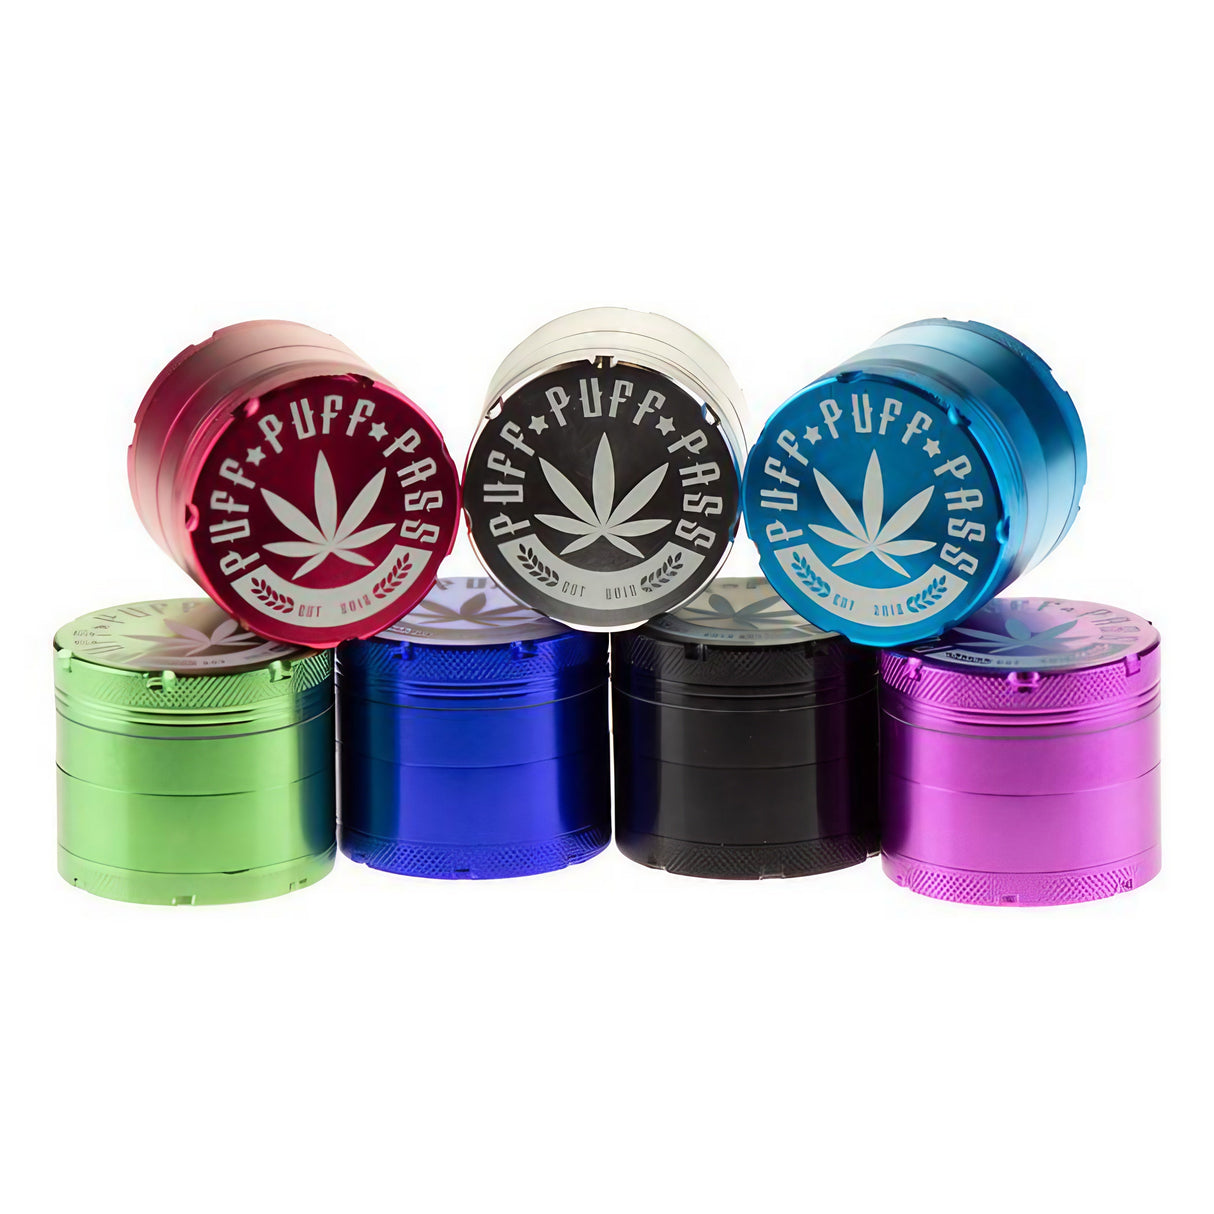 Assortment of Puff Puff Pass 50mm Aluminum Grinders in various colors displayed side by side